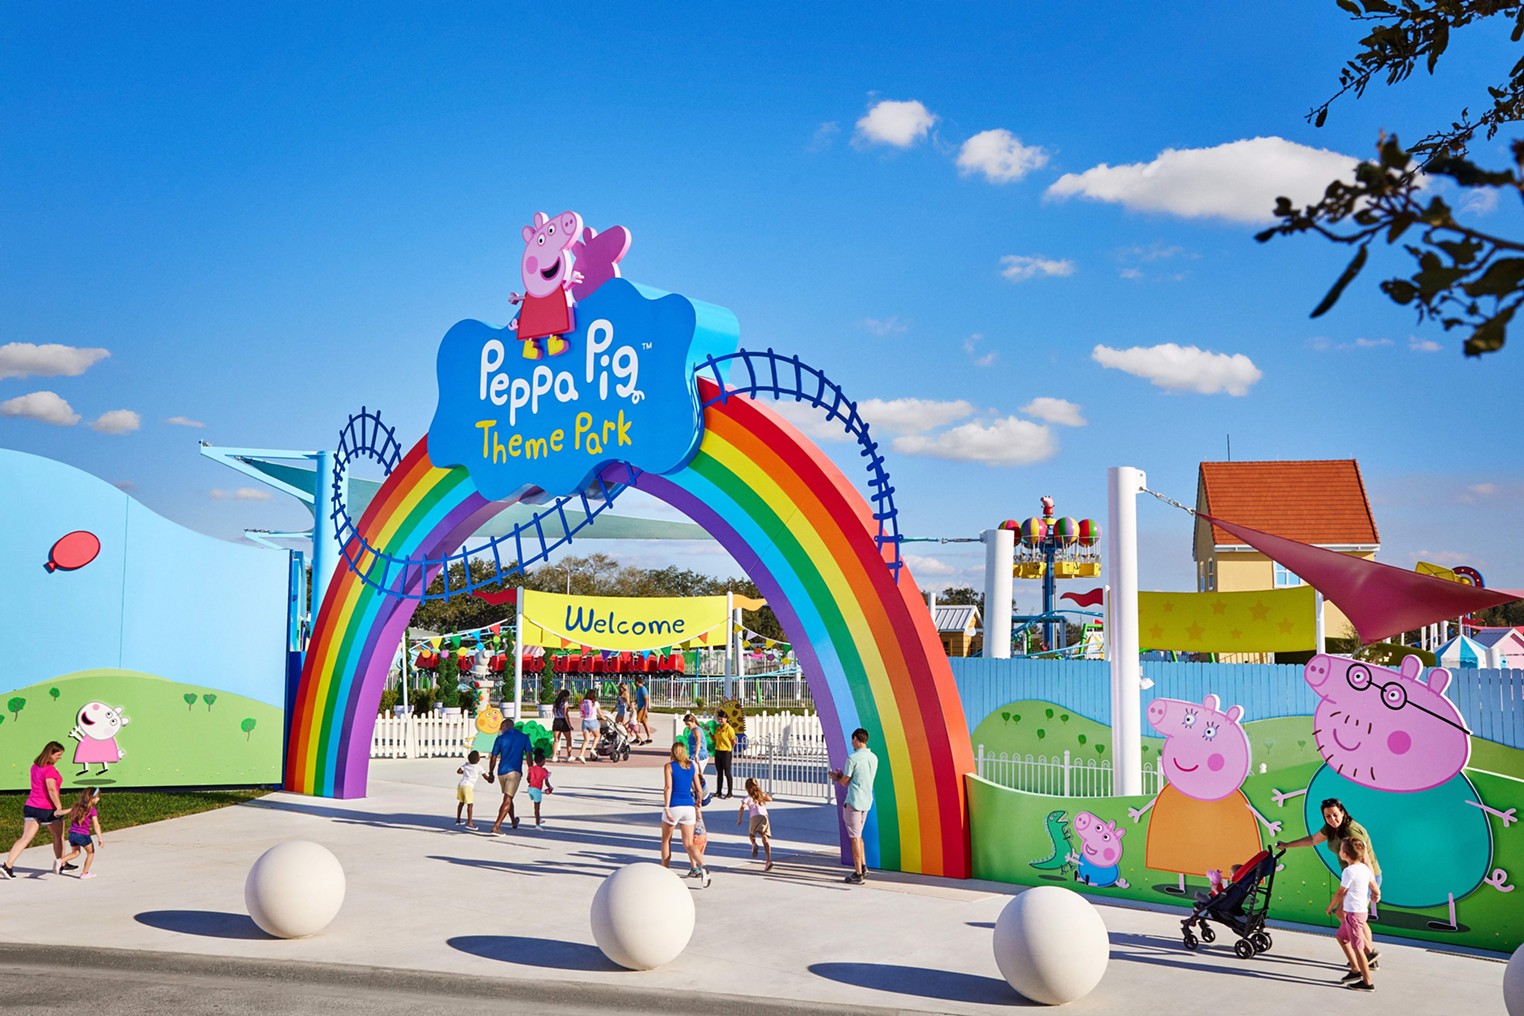 North Richland Hills is getting a Peppa Pig Theme Park for the little ones